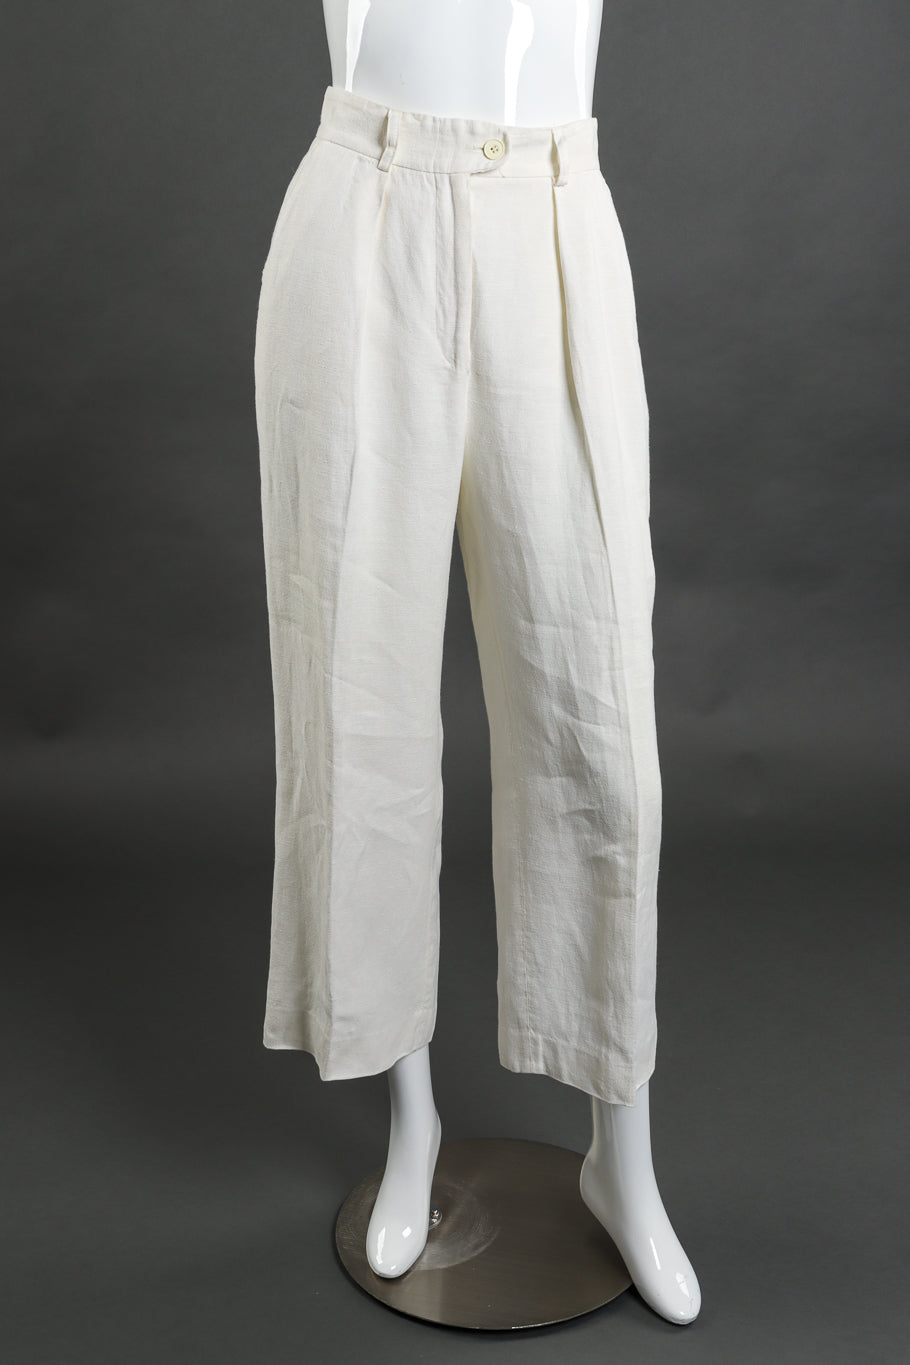 Vintage Alberta Ferretti woven linen embroidered cream mock tunic vest and pant twin set front view of twin set trousers as worn on mannequin @Recess LA